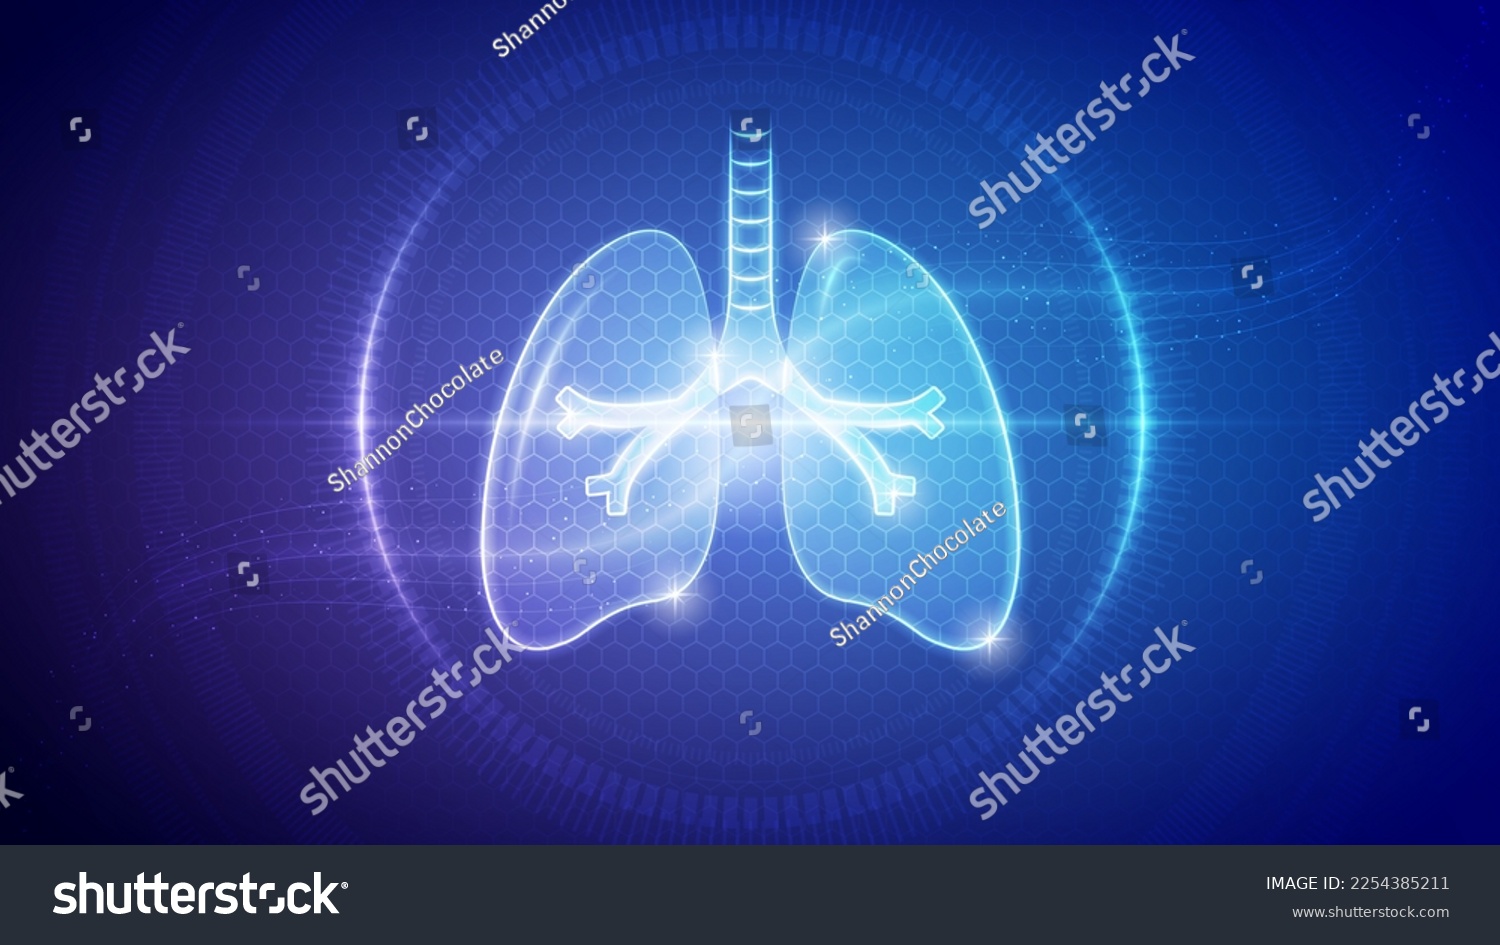 Futuristic Medical Hologram Neon Glow Translucent Human Pair of Lungs Respiratory System Backdrop Background Illustration #2254385211